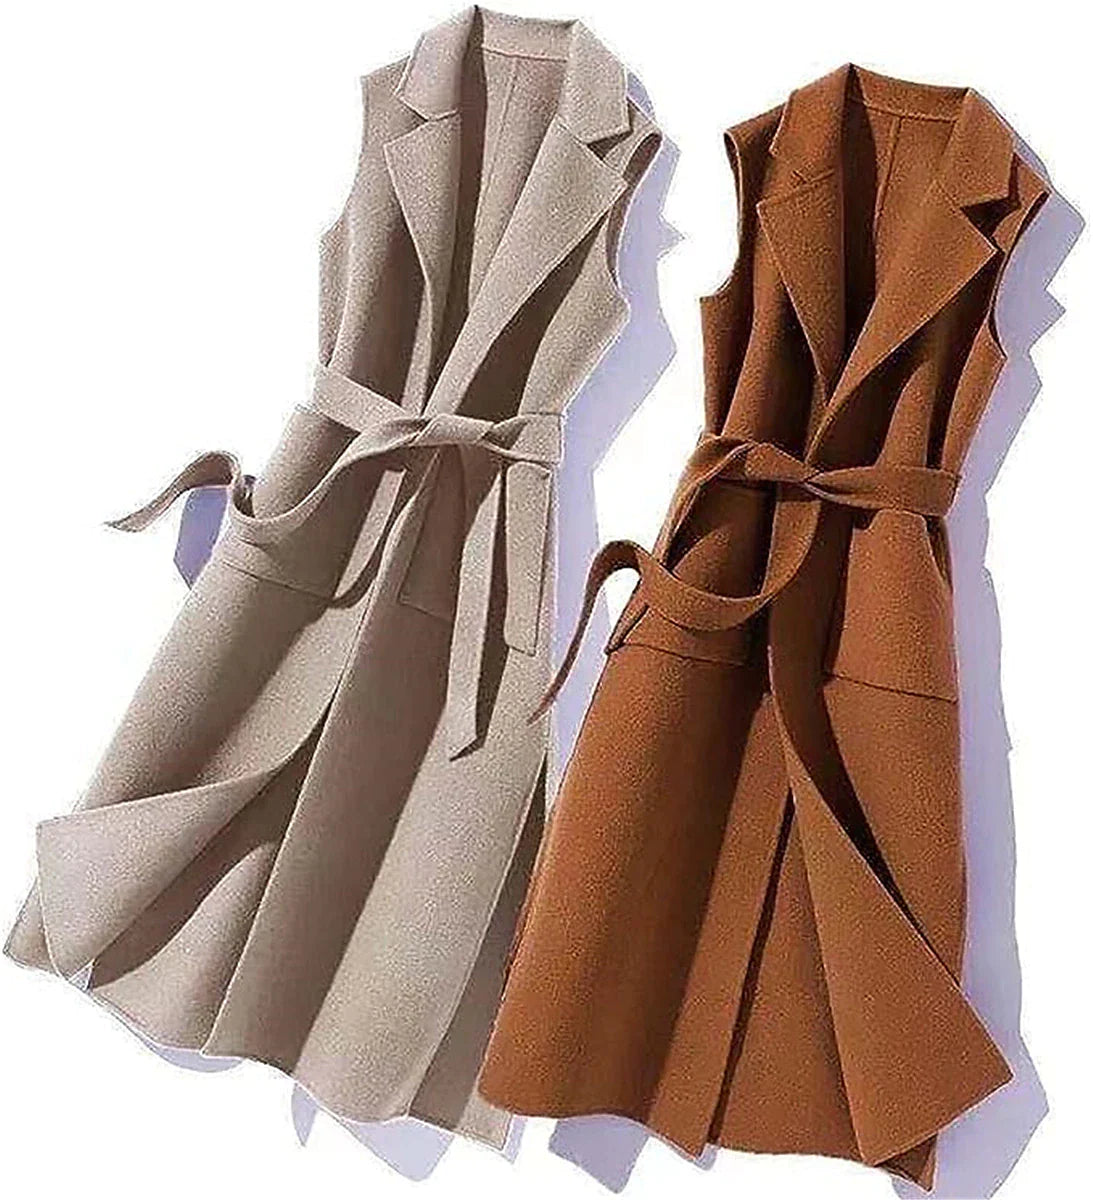 Women's Vest Winter Sleeveless Overcoat Long Pea Coat Fall Trench Coat with Belt Office Casual / Daily Fashion OuterwearBlack S